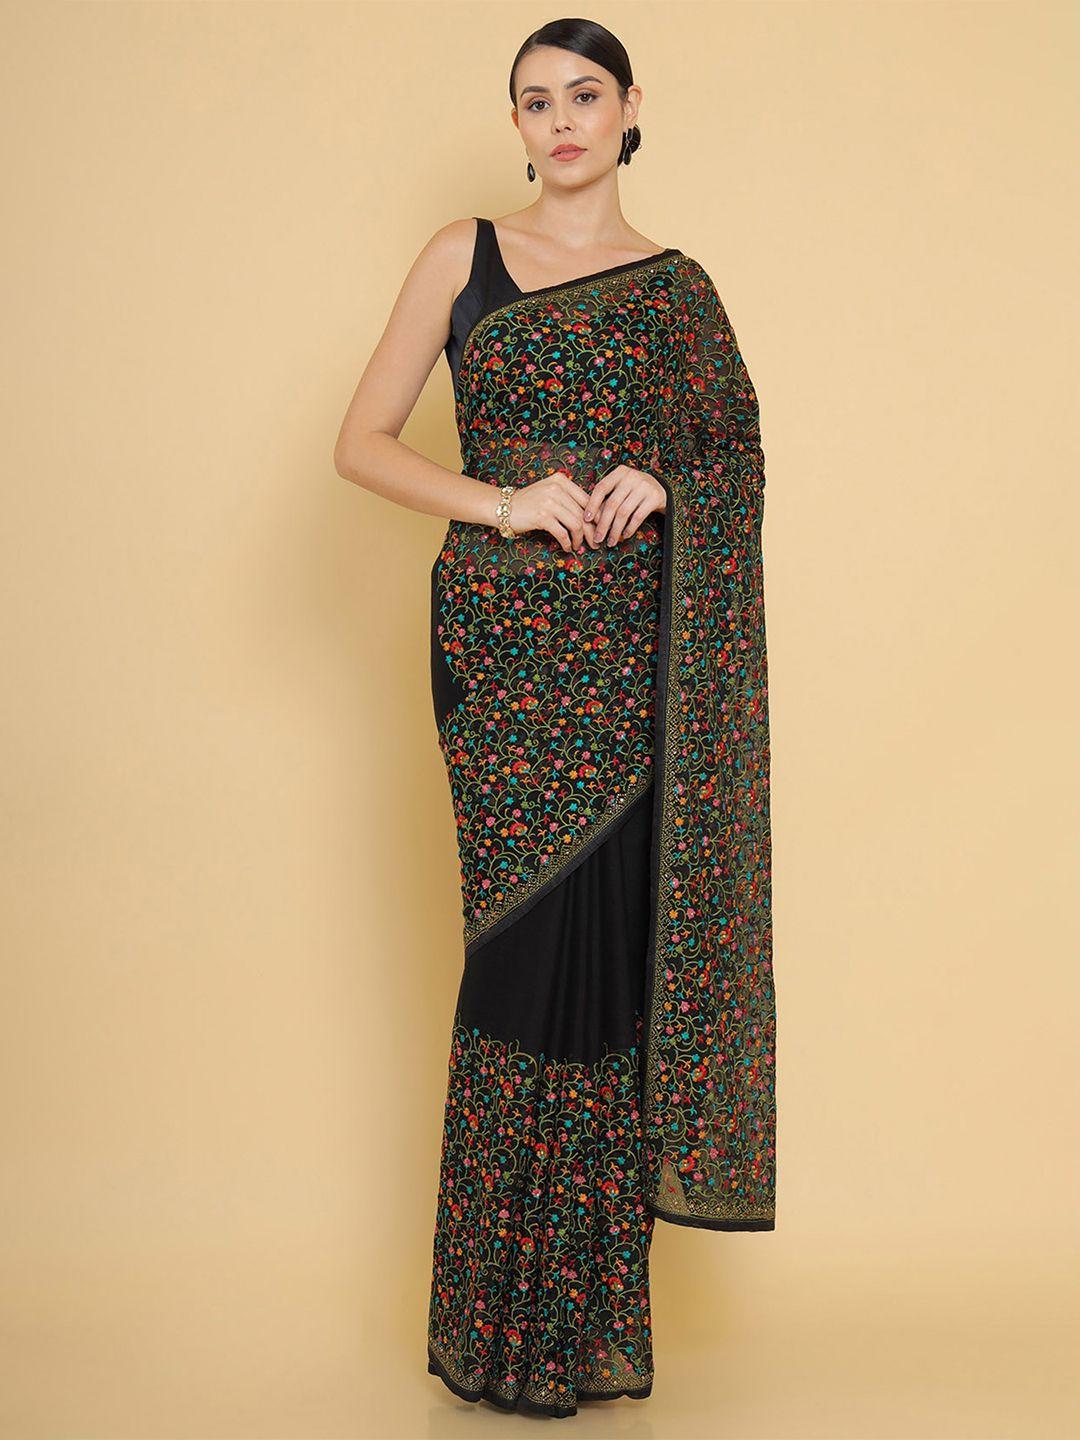 soch-black-chiffon-saree-with-floral-embroidery-and-embellished-borders